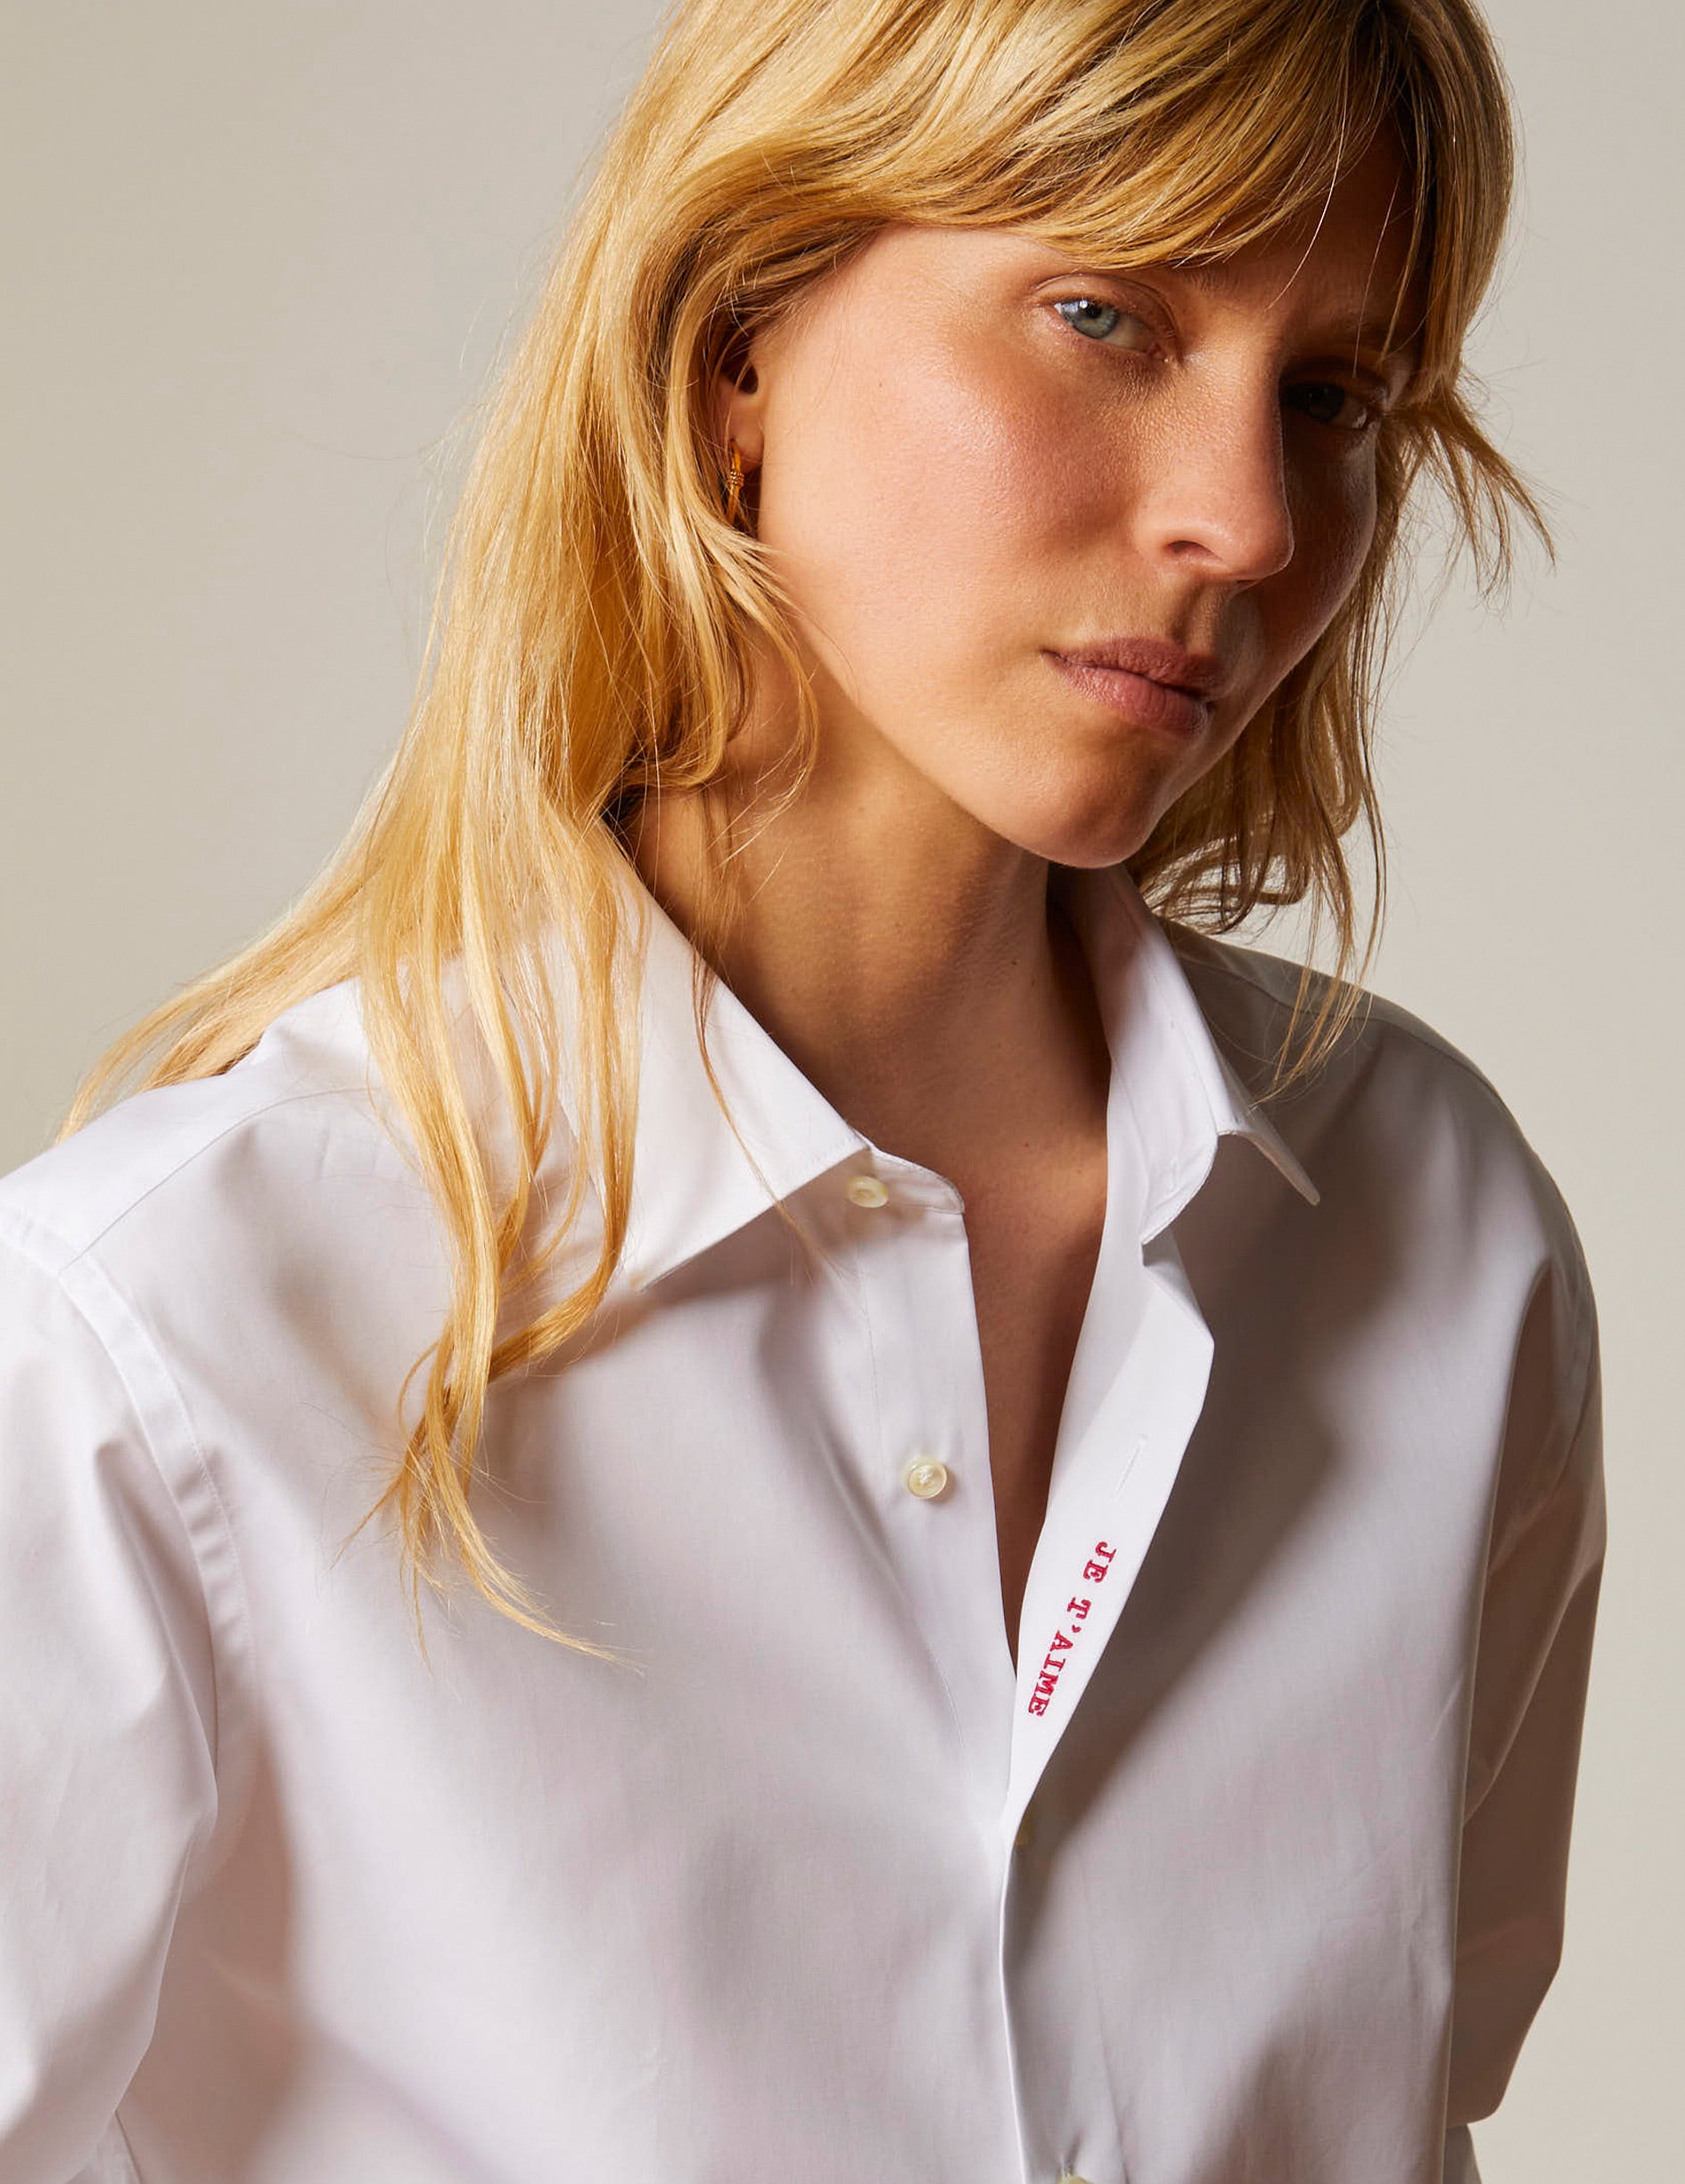 "Je t'aime" white shirt embroidered in red - Poplin - Figaret Collar